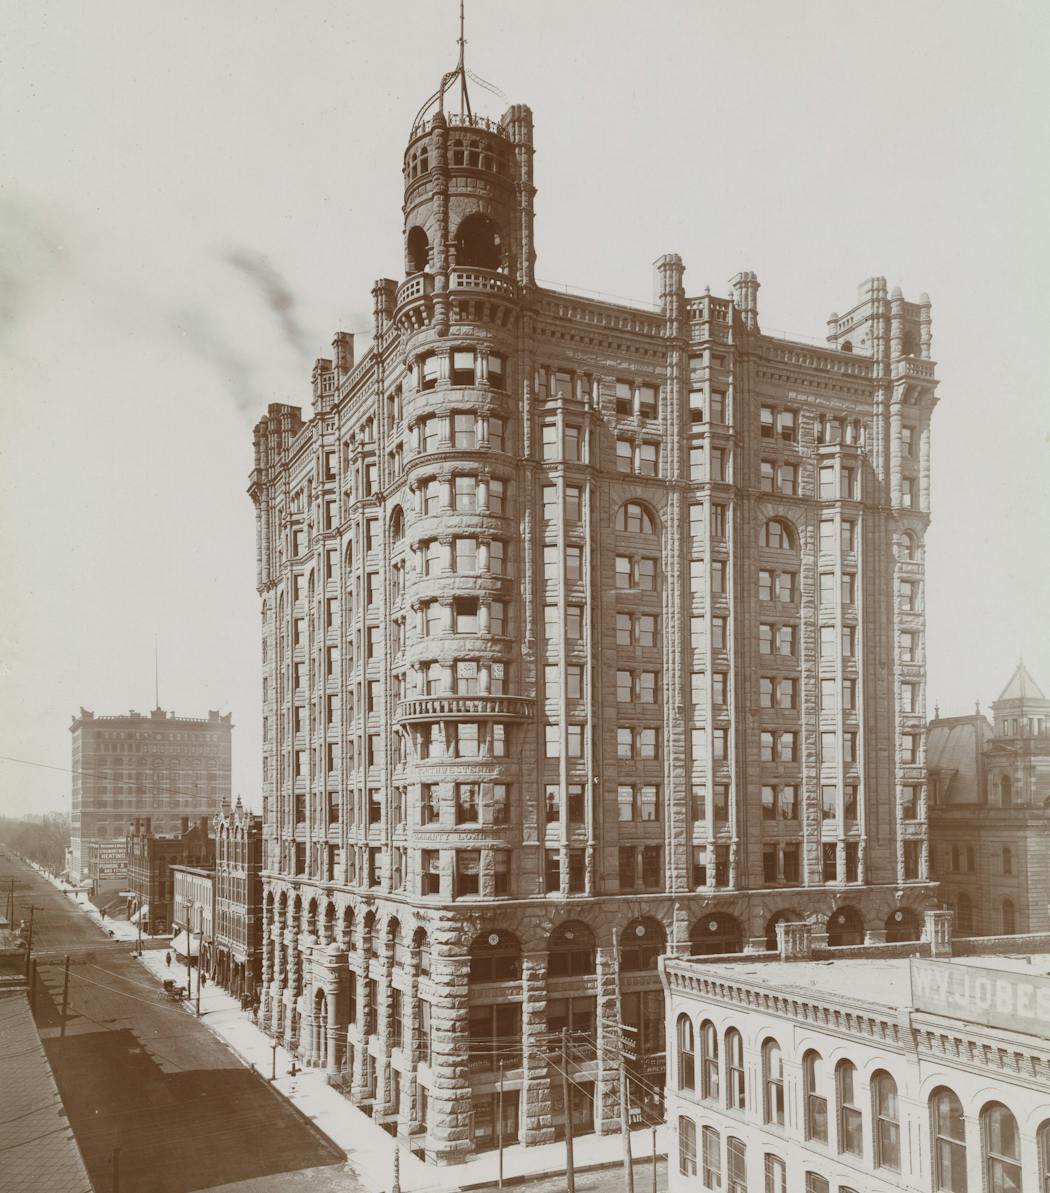 The Metropolitan Building, in the early 1900s. It was located at 3rd Street and 2nd Avenue S.